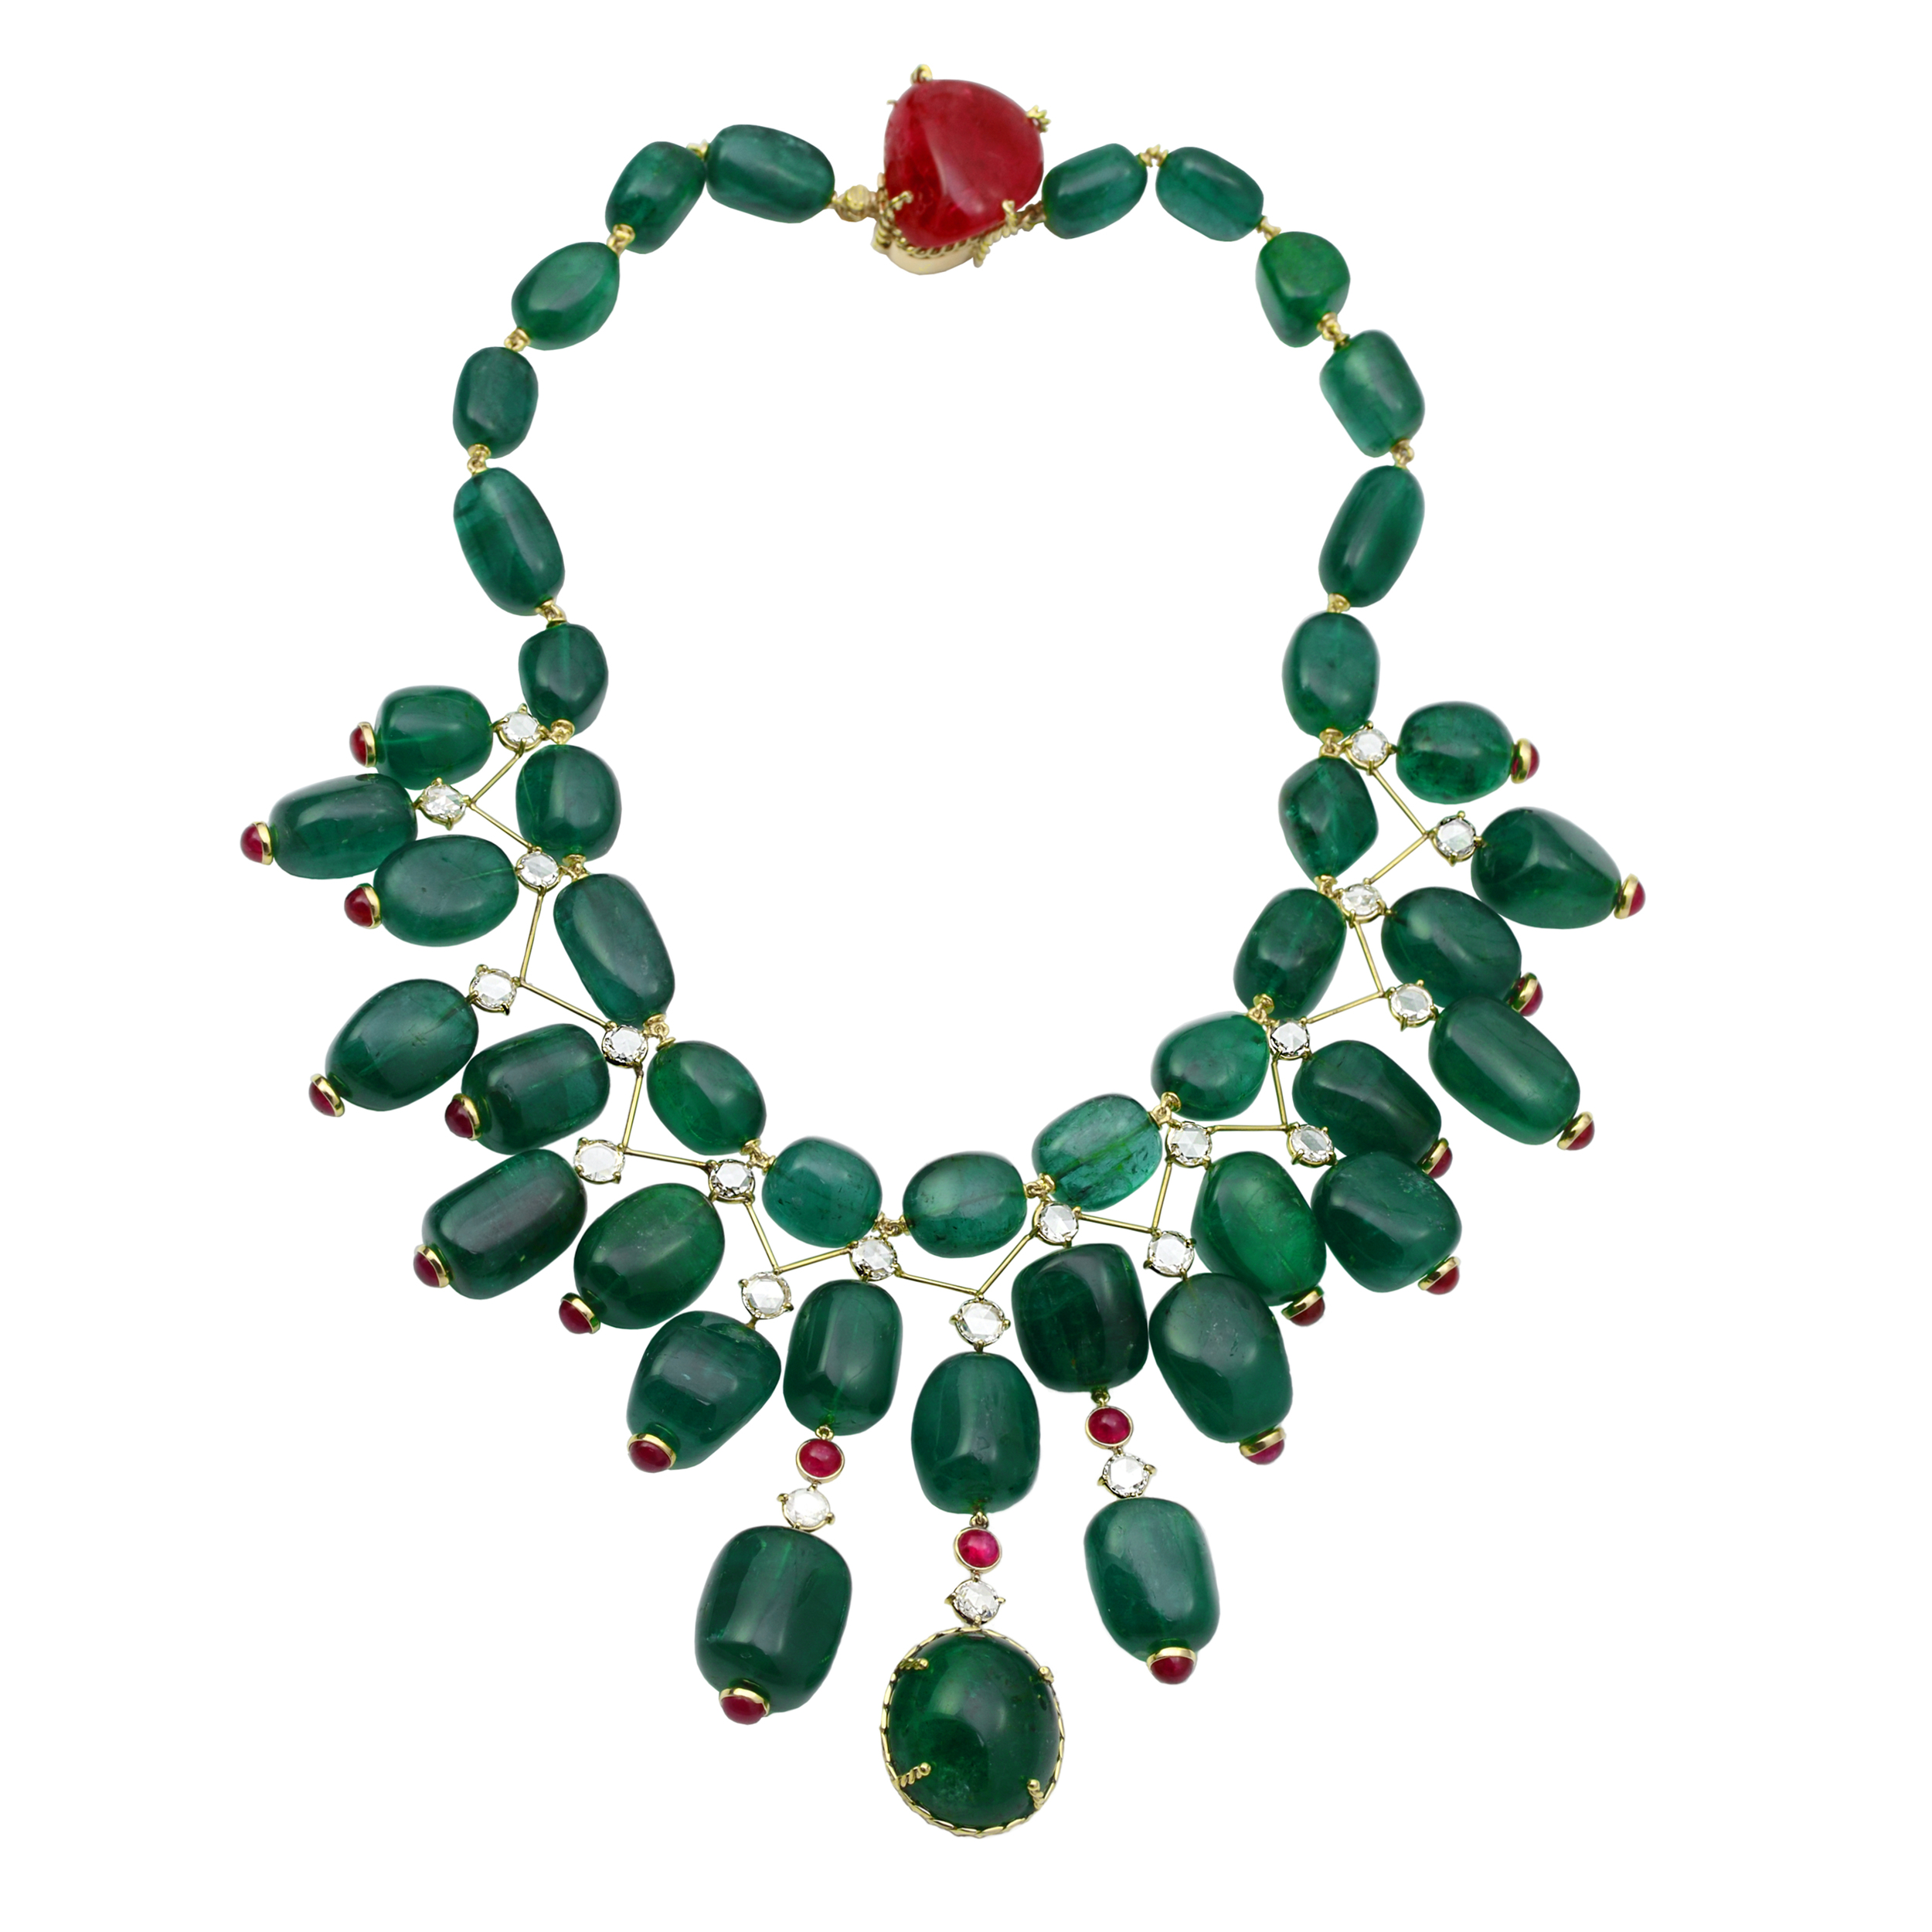 Genuine & Natural Gemstone Bead Necklaces and Jewelry — RAF - Rare ...